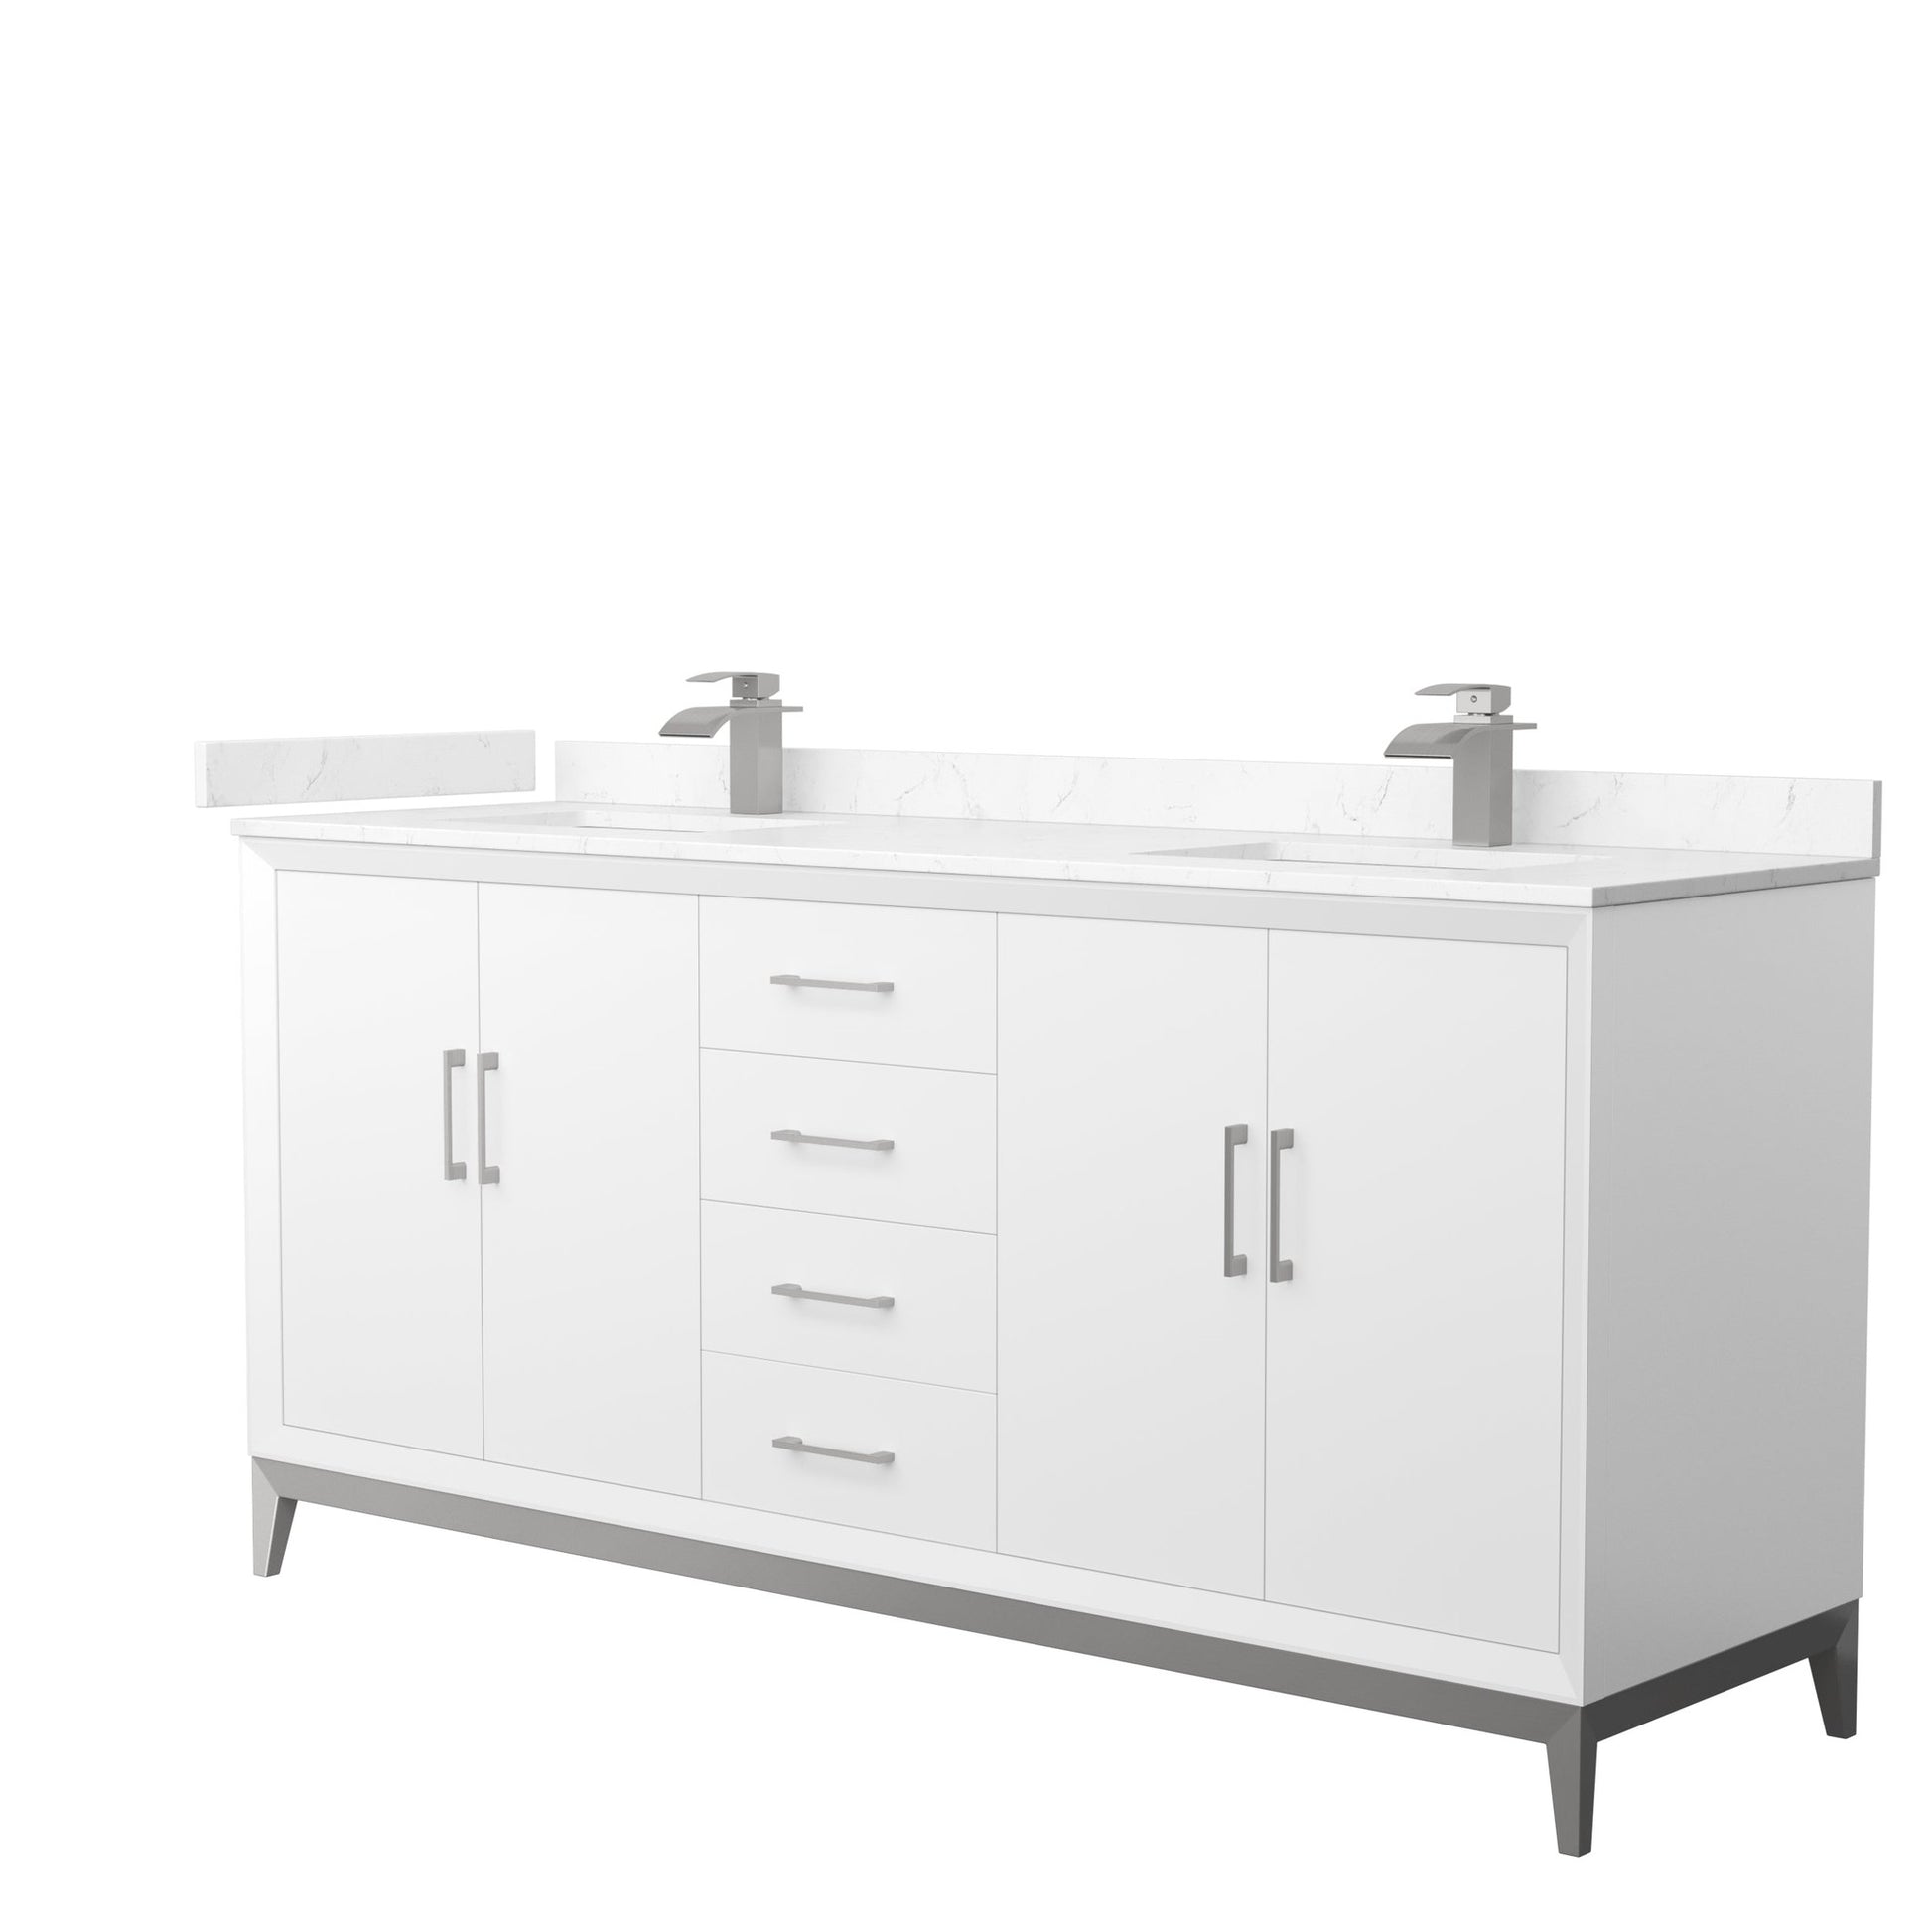 Wyndham Collection Amici 72" Double Bathroom Vanity in White, Carrara Cultured Marble Countertop, Undermount Square Sinks, Brushed Nickel Trim